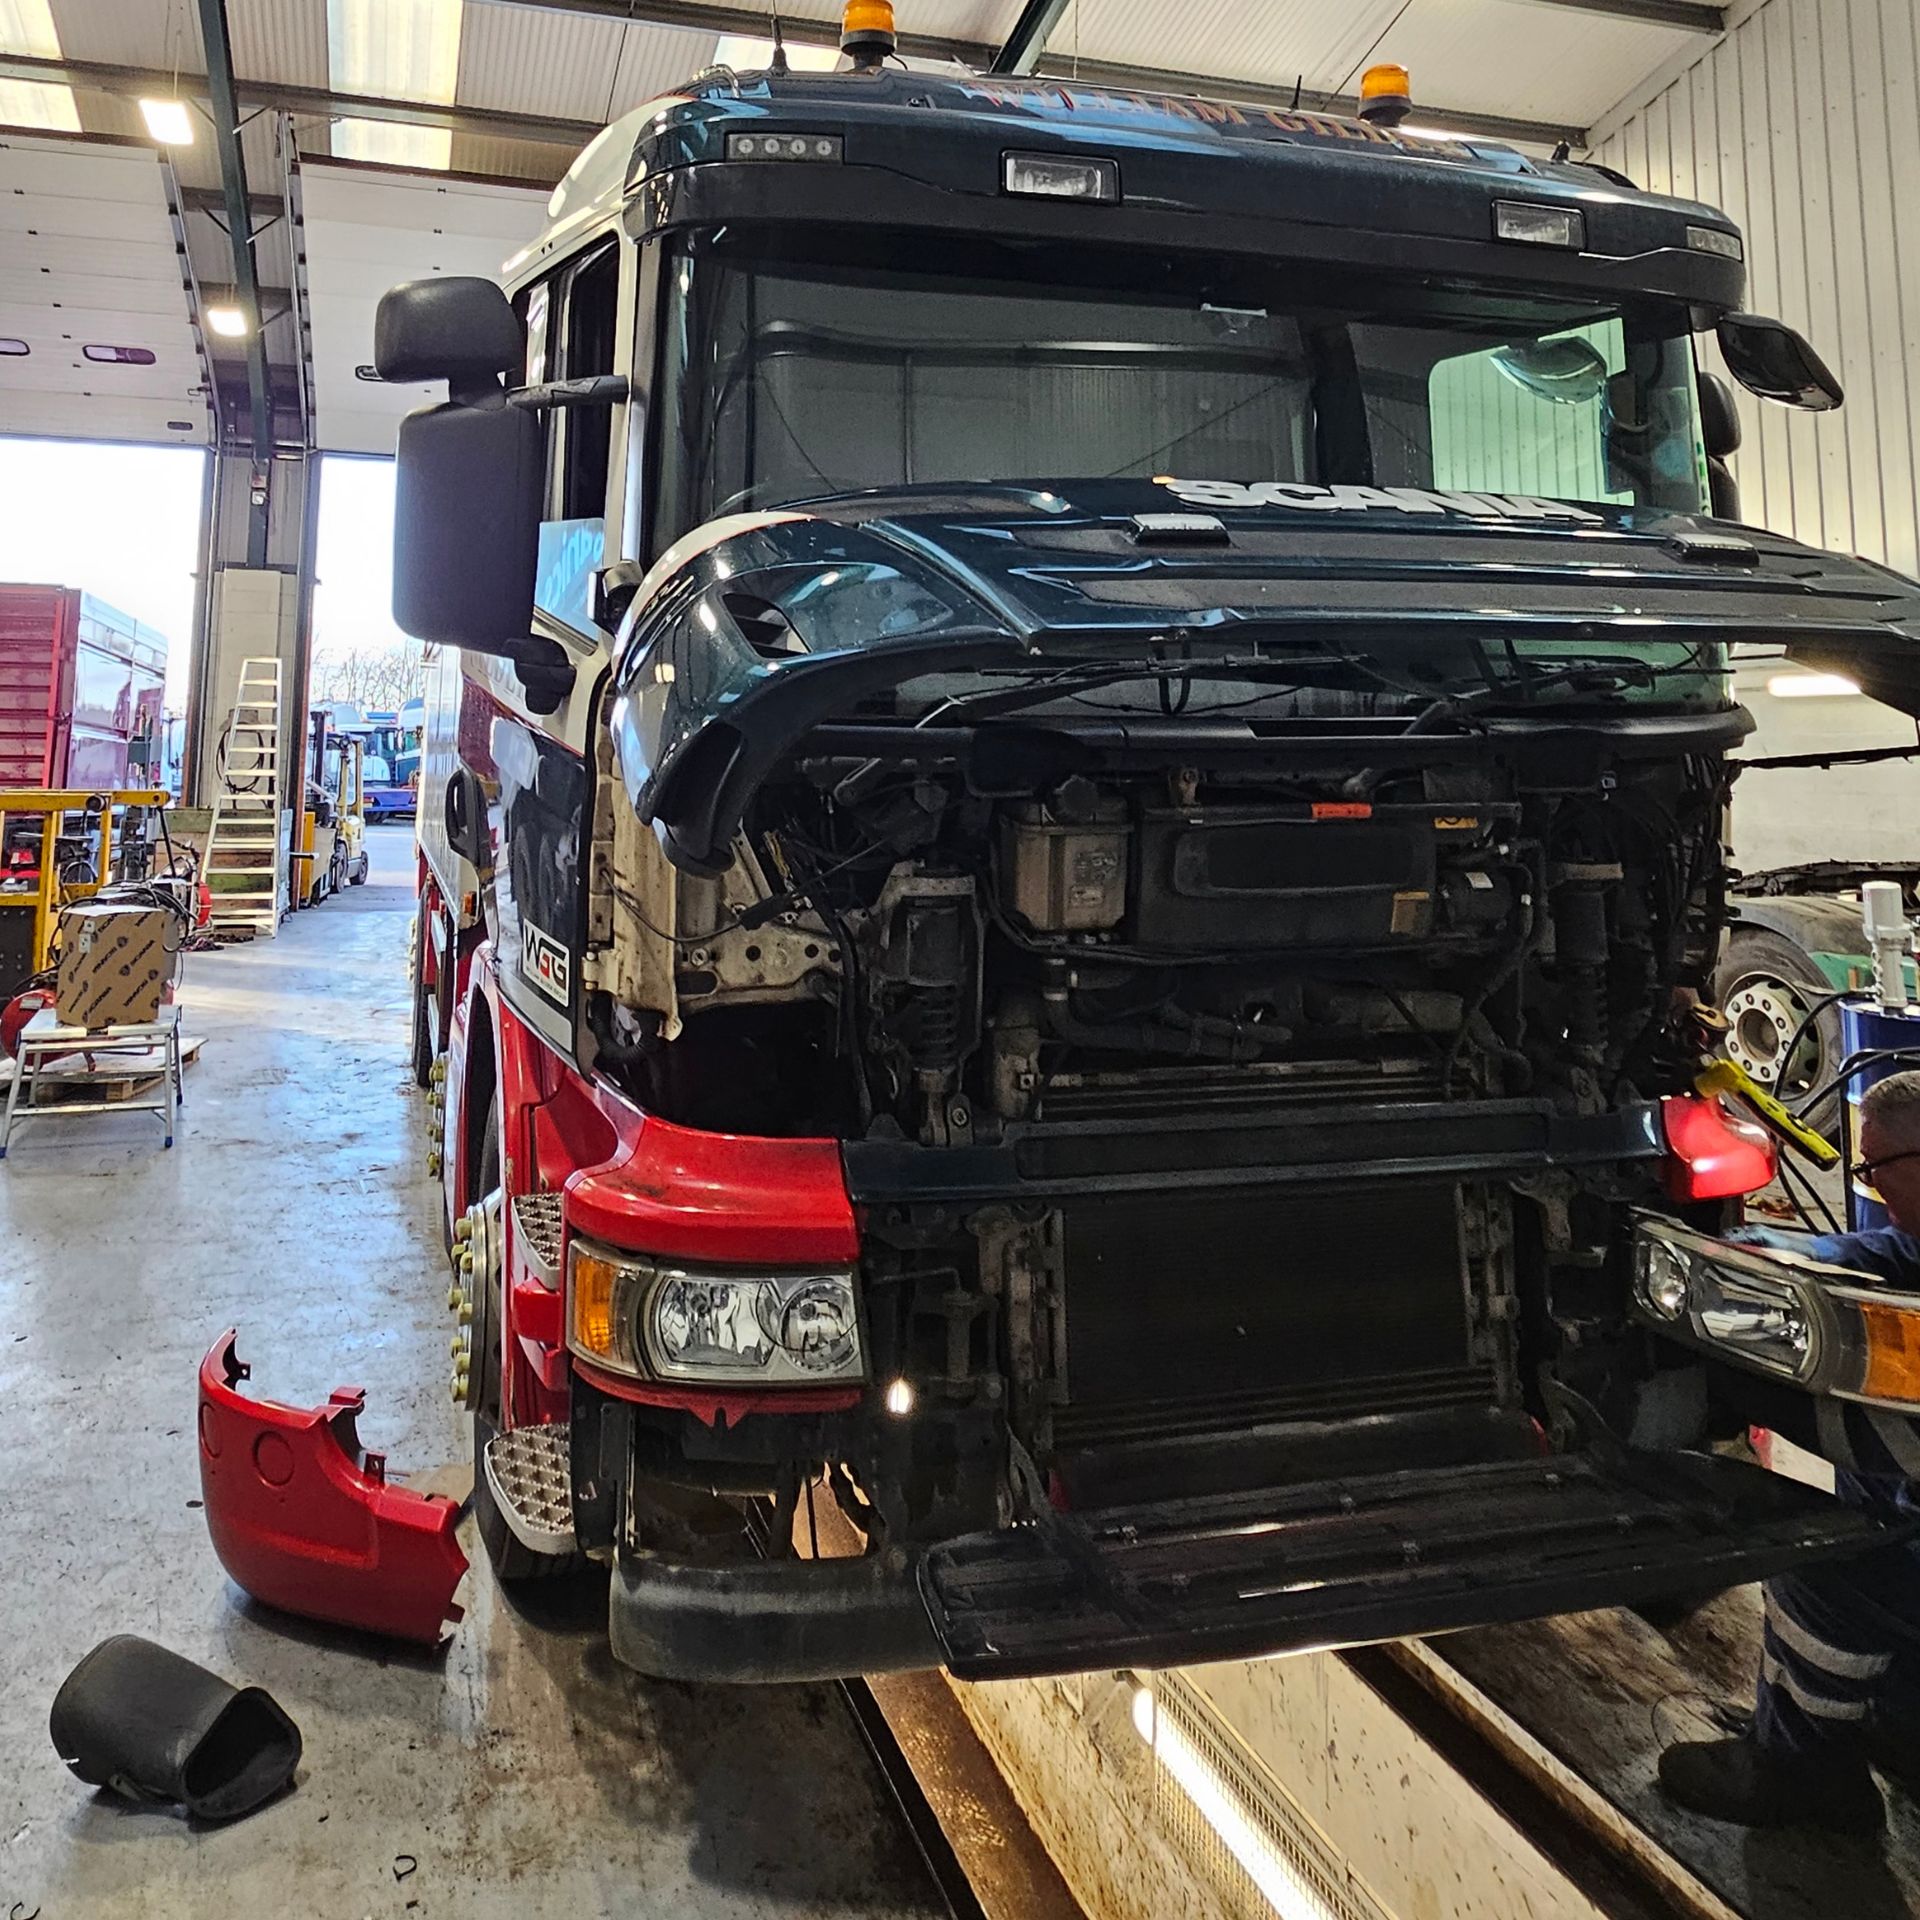 A lorry being repaired in a garage